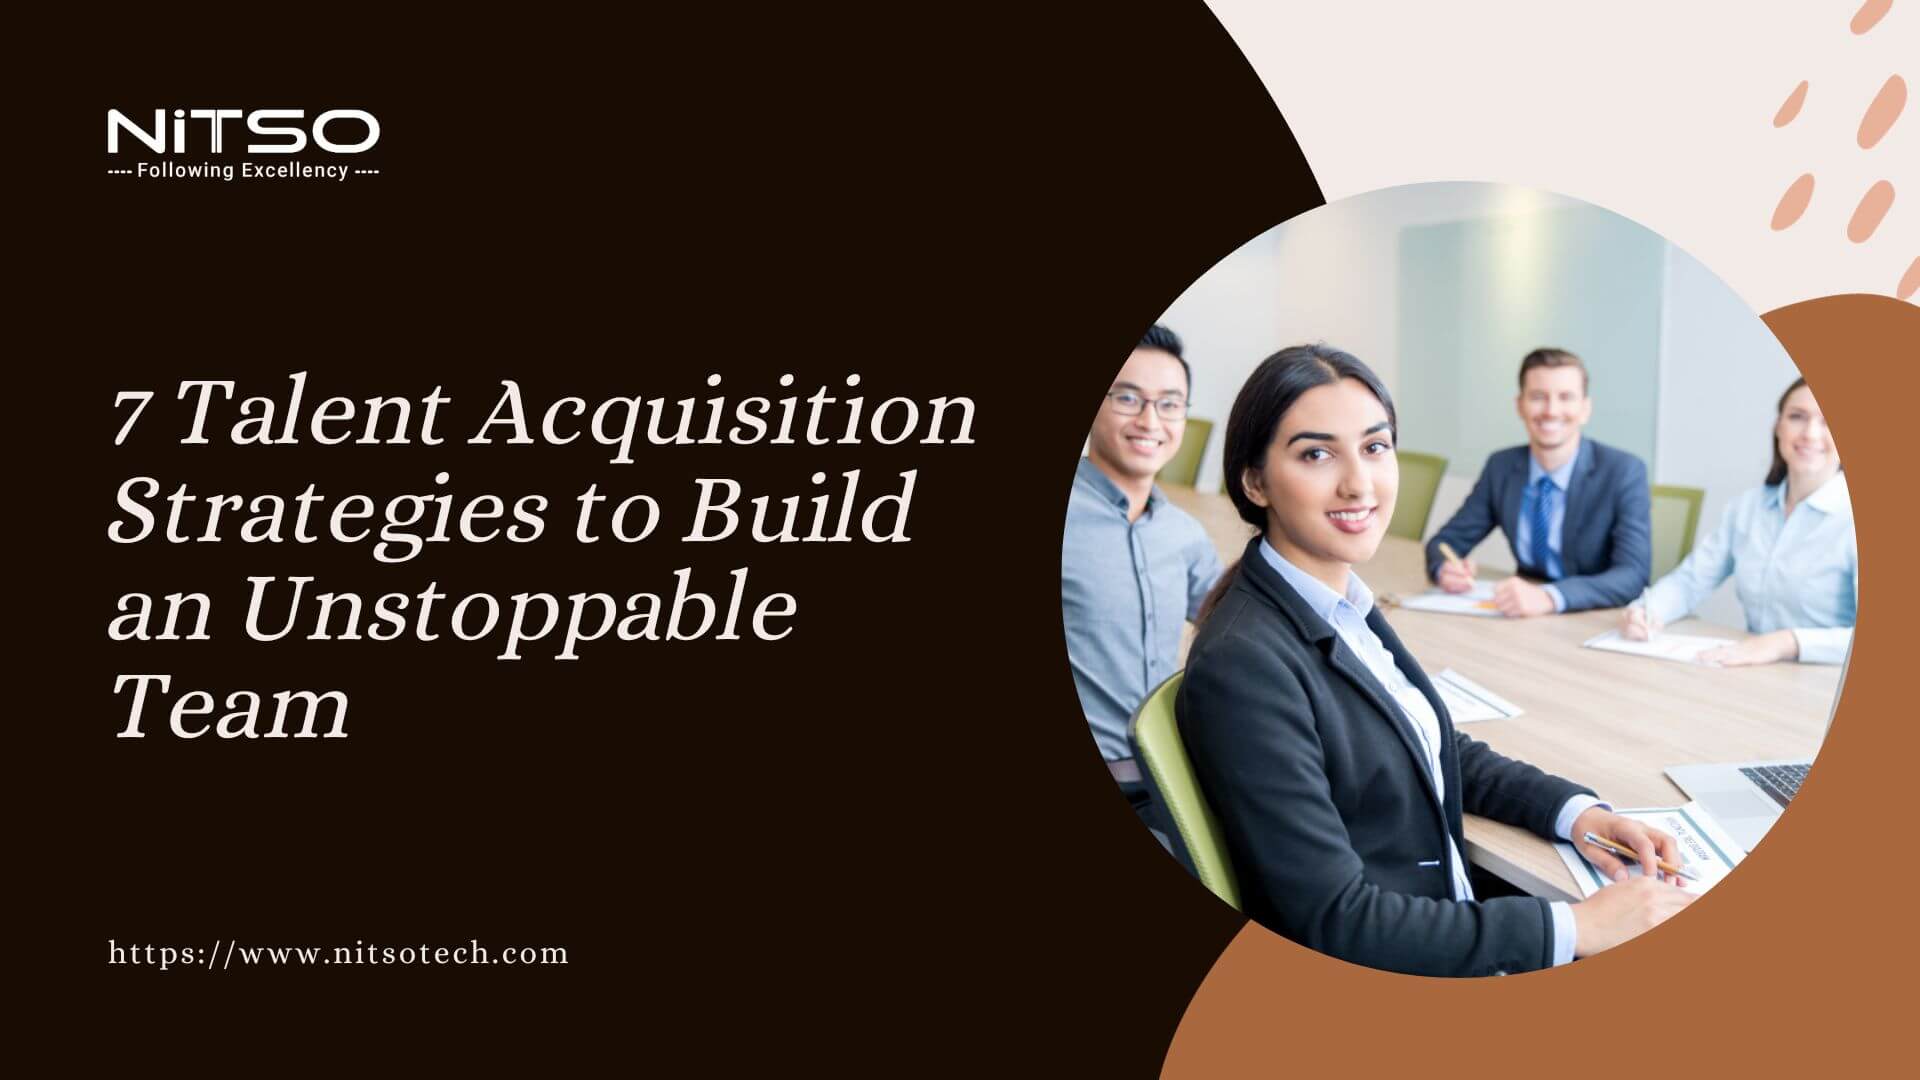 7 Talent Acquisition Strategies to Build an Unstoppable Team